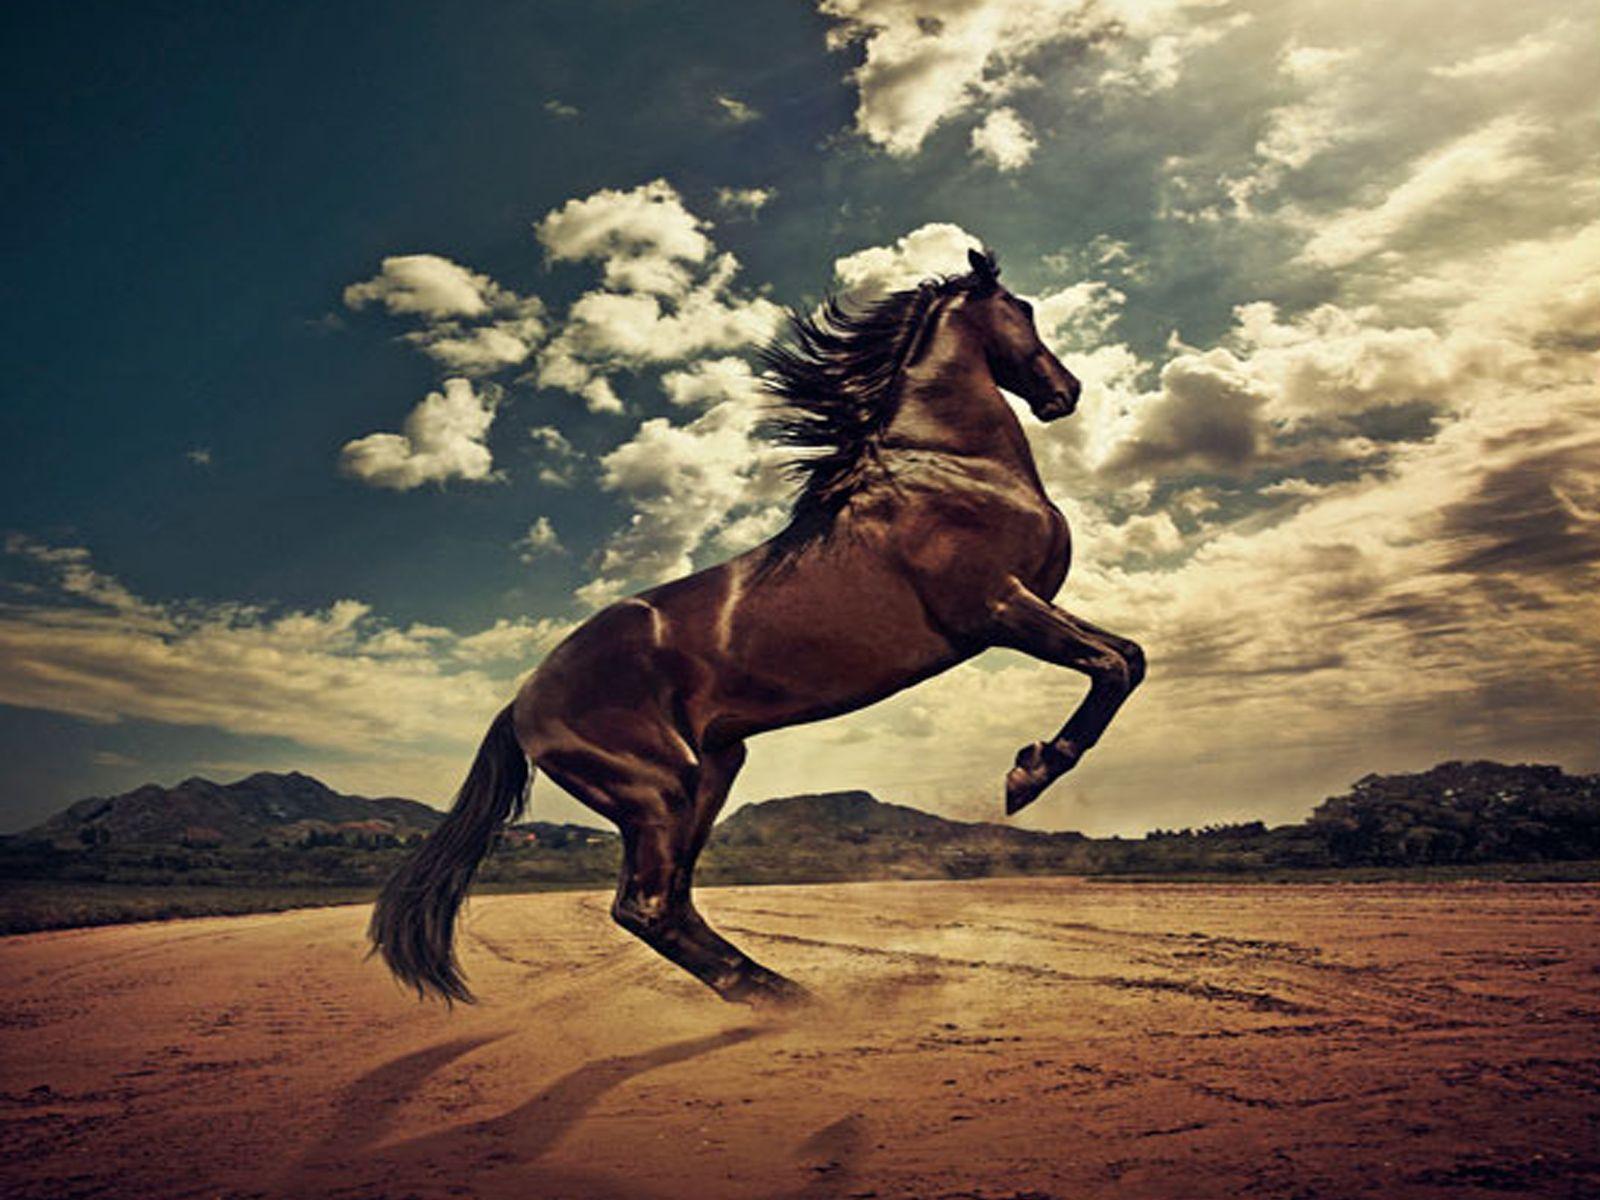 Horse Wallpaper. Discover more ideas about Horse, Horse